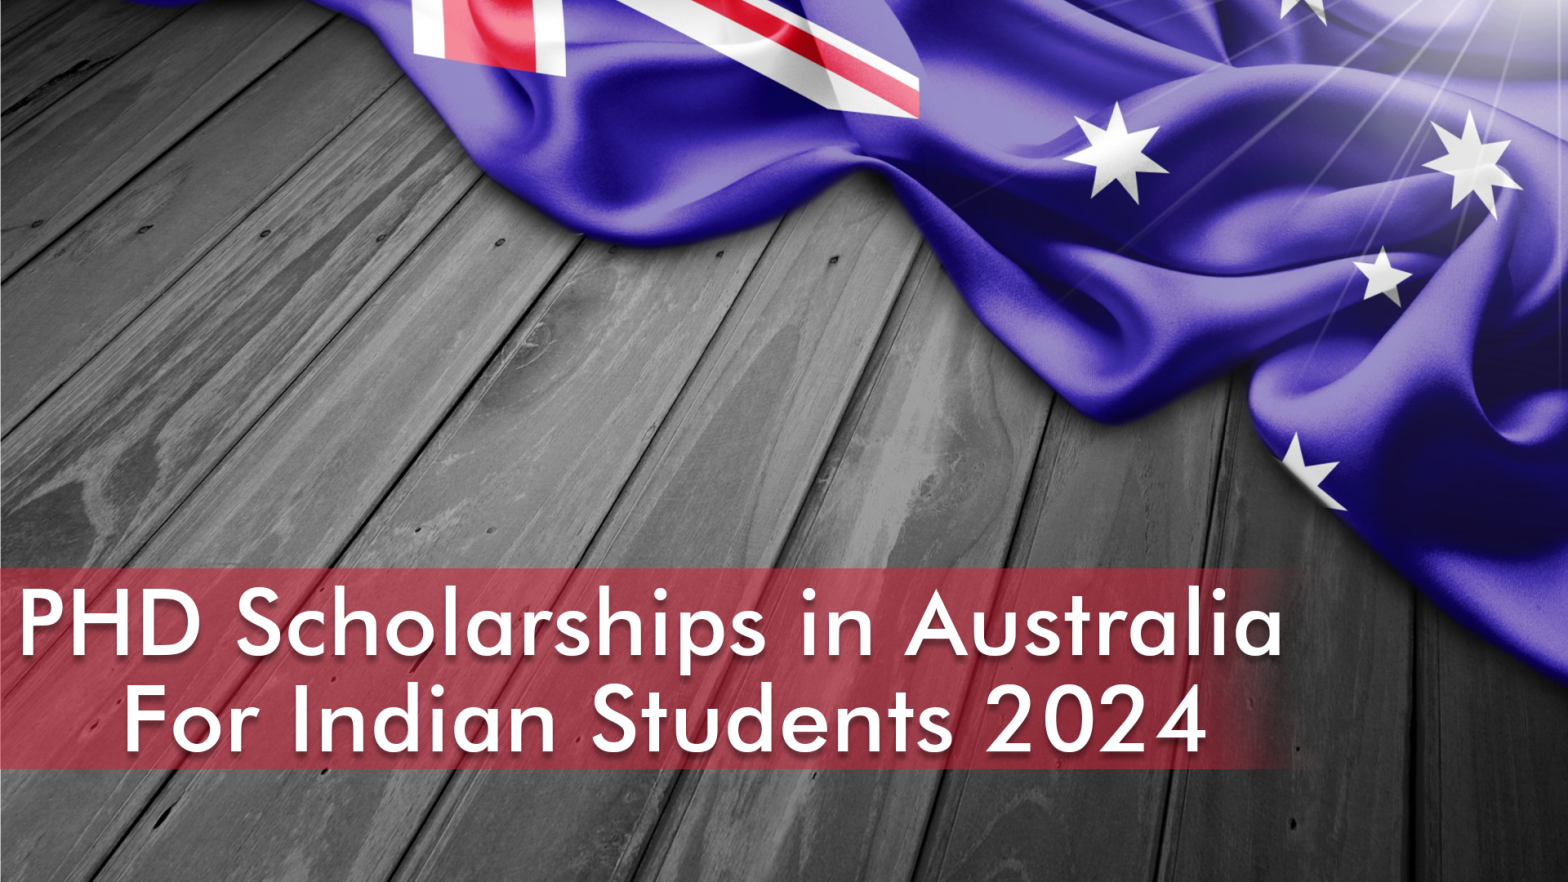 phd scholarships for indian students in australia